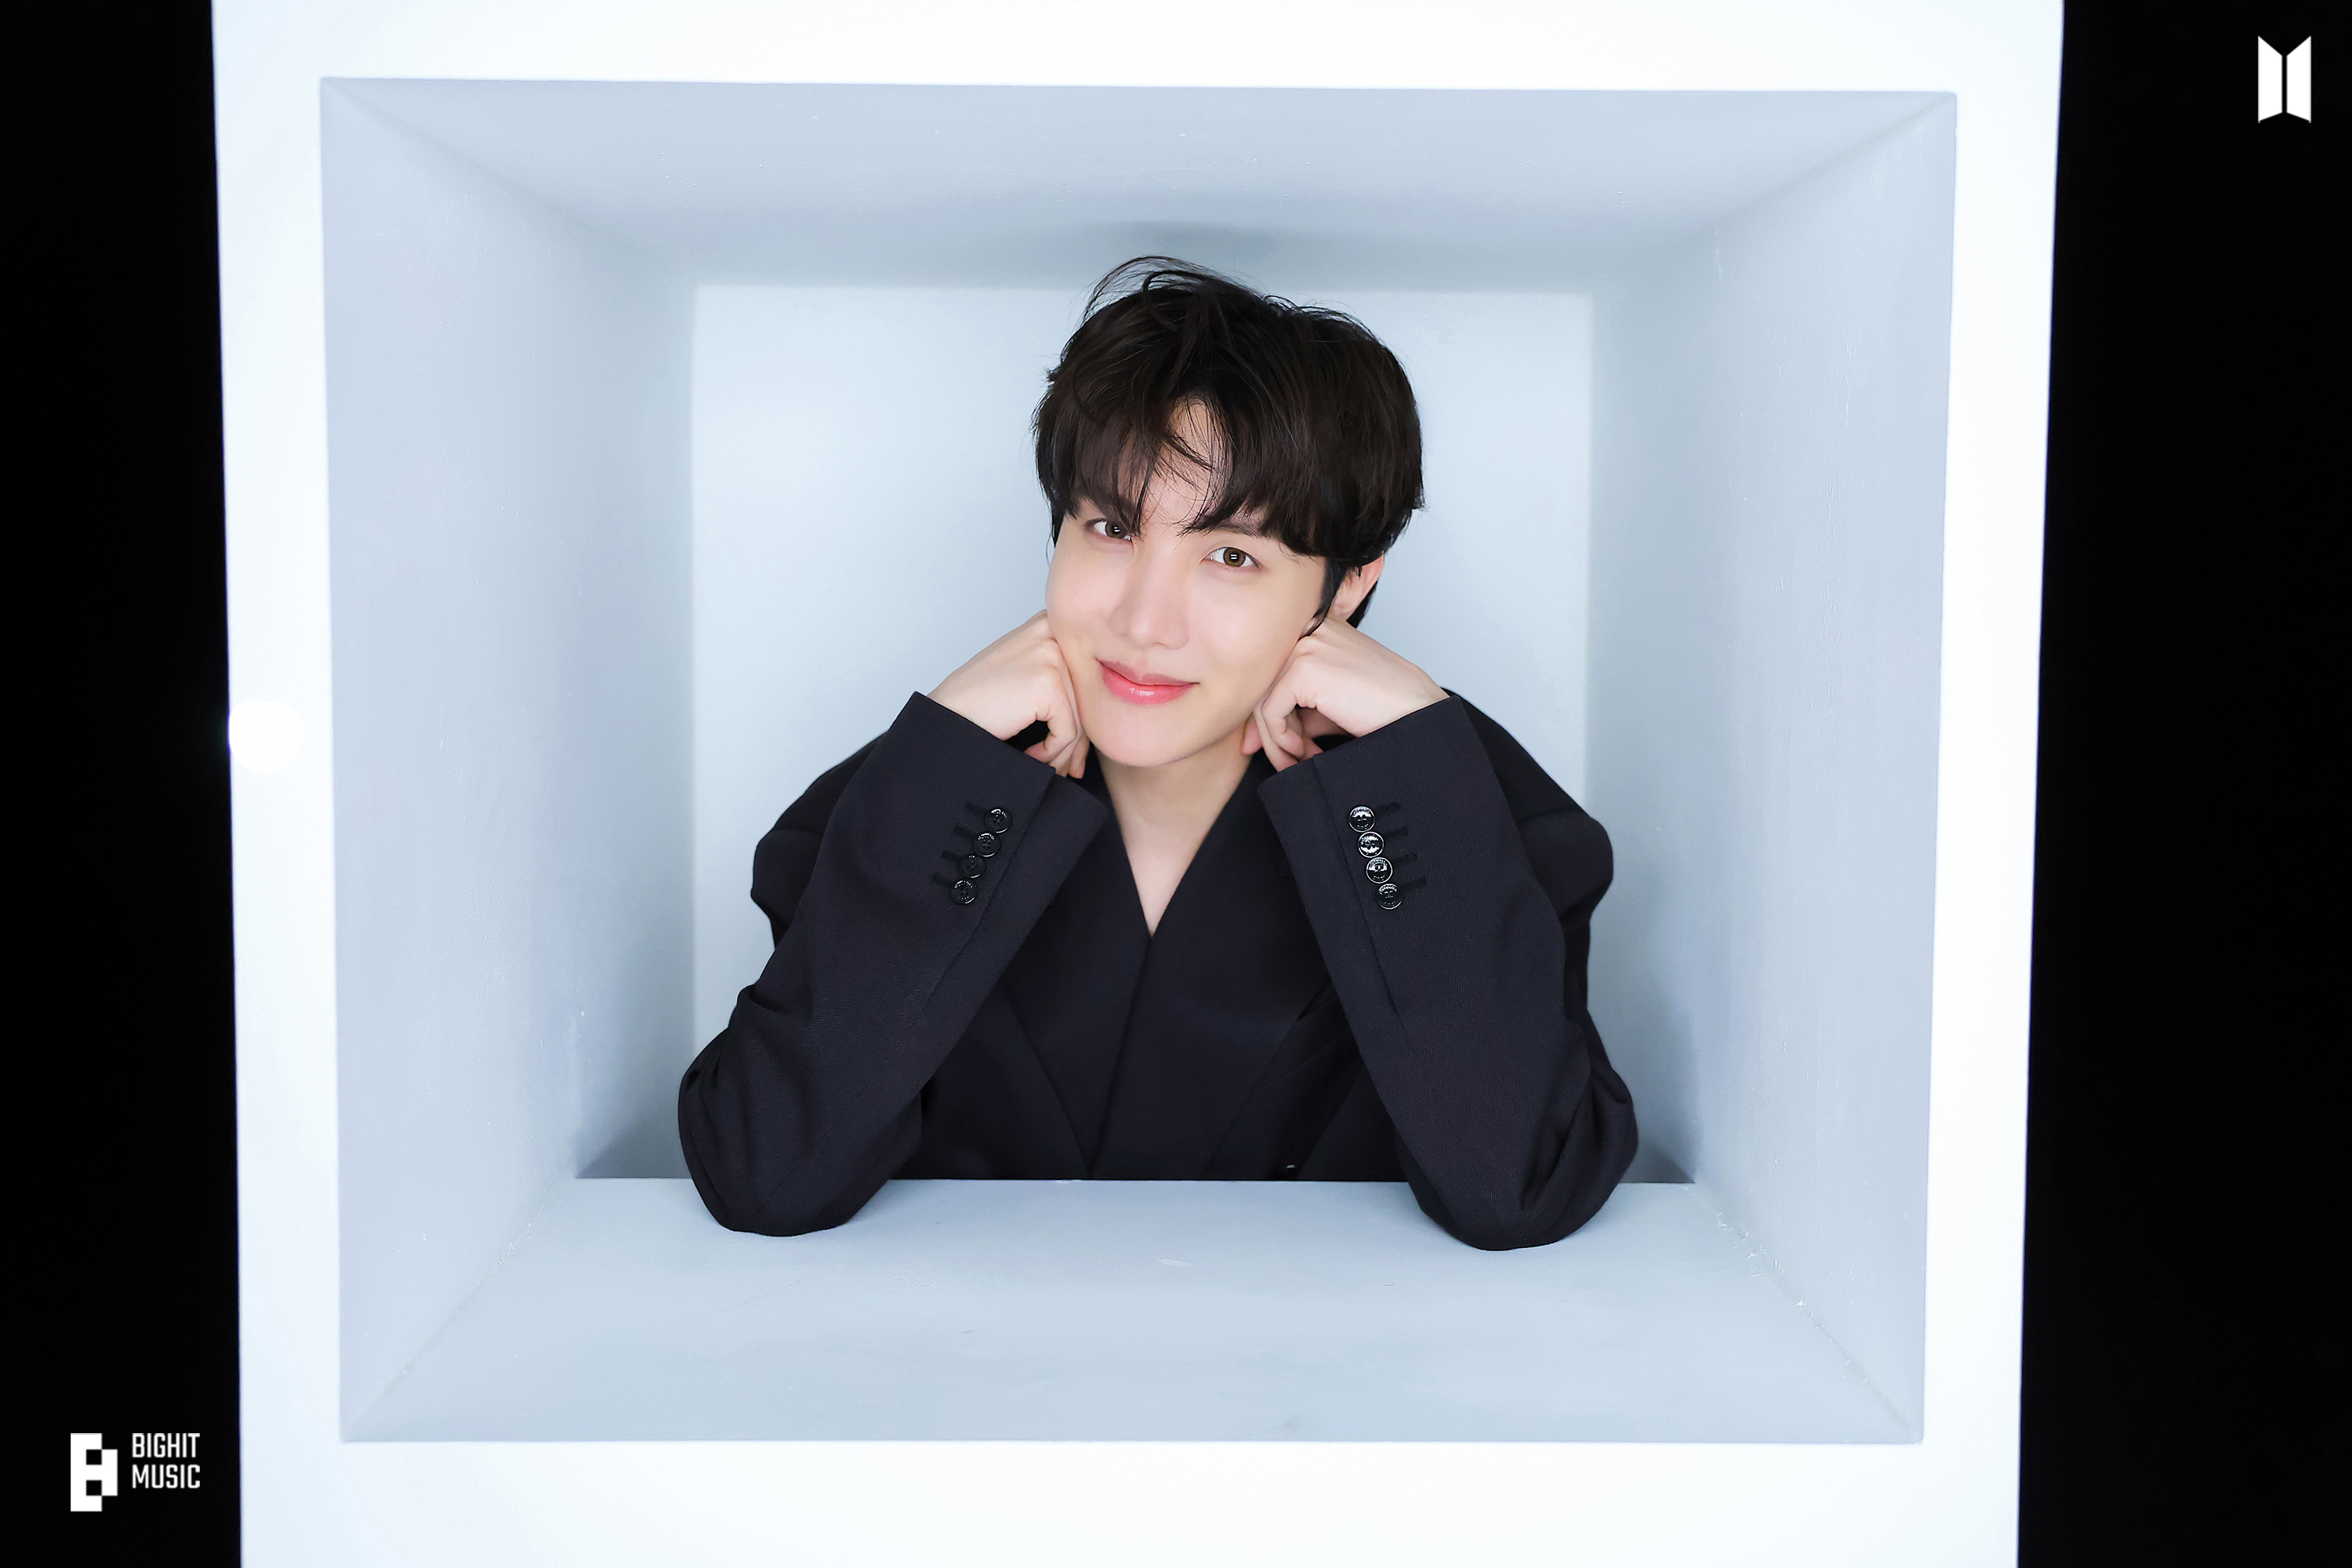 j-hope 'Jack In The Box (HOPE Edition)' Jacket Photo Sketch